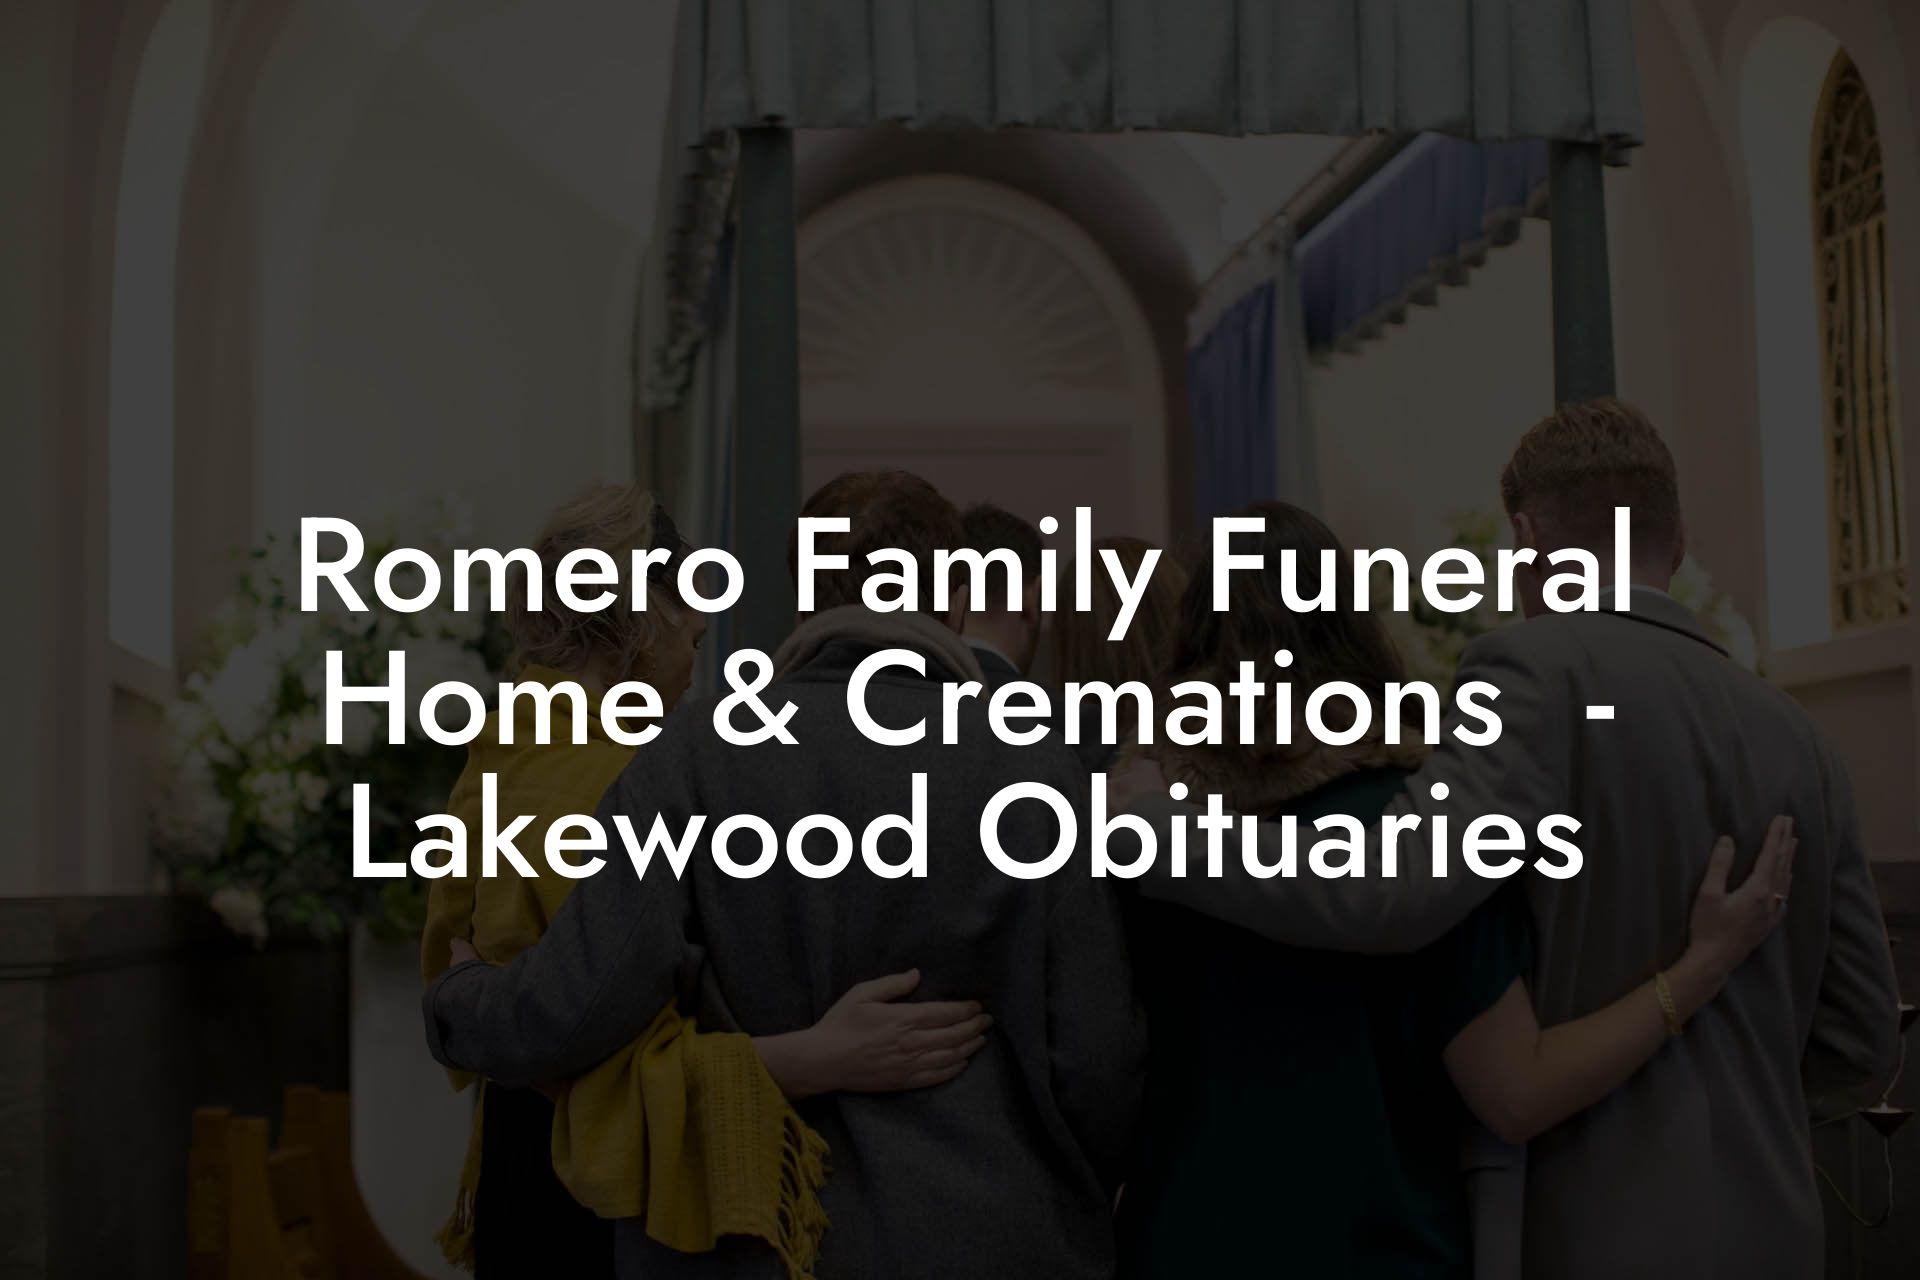 Romero Family Funeral Home & Cremations  - Lakewood Obituaries